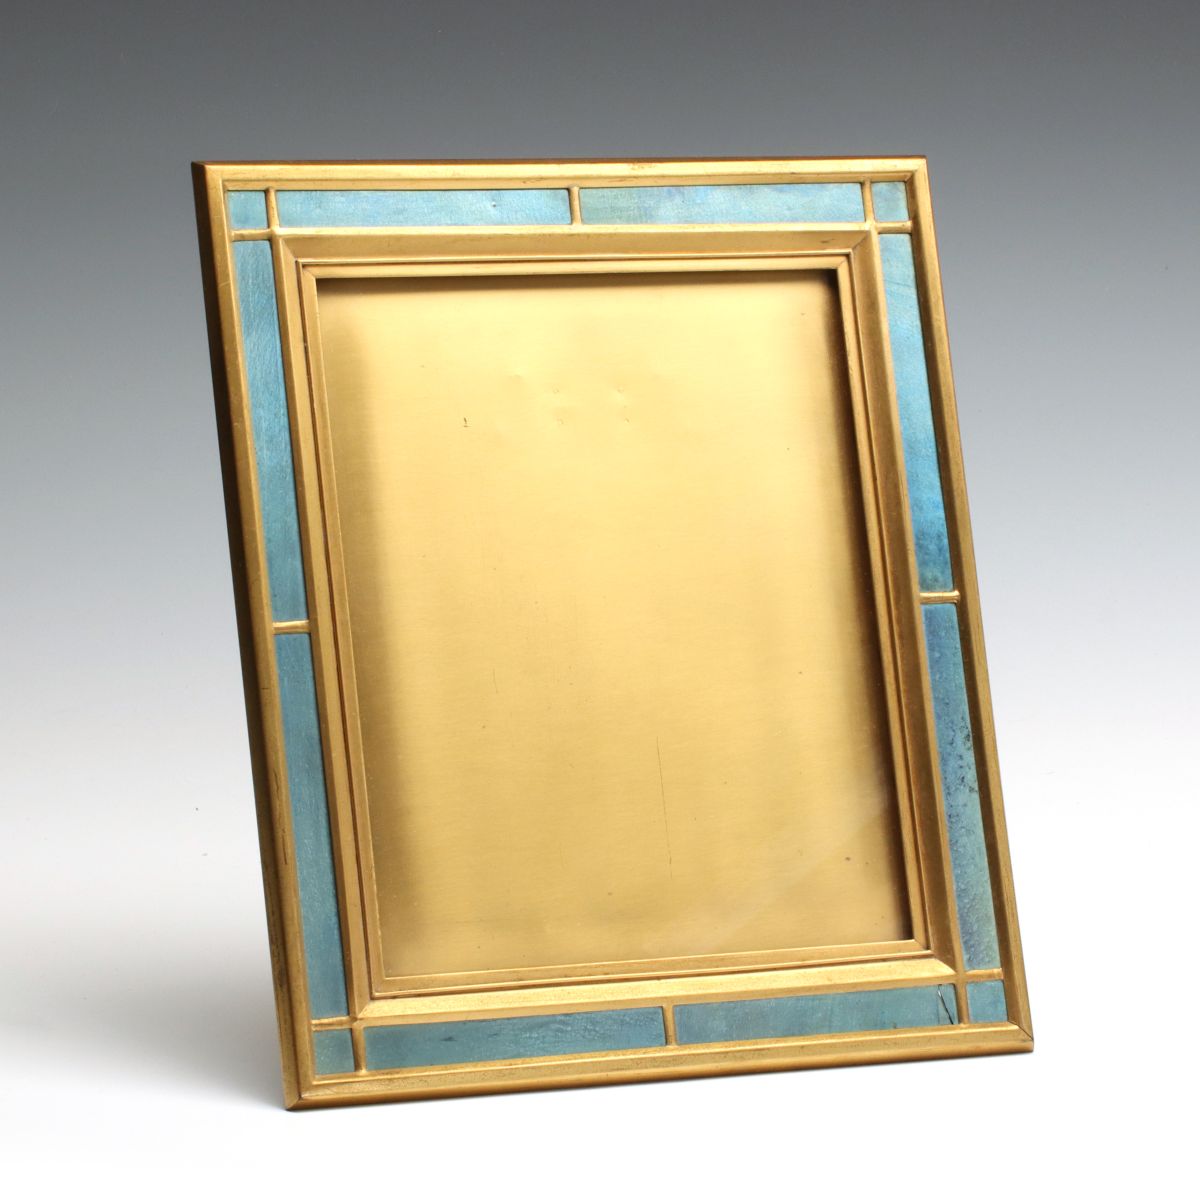 A GILT BRONZE AND FAVRILE PICTURE FRAME SIGNED TIFFANY